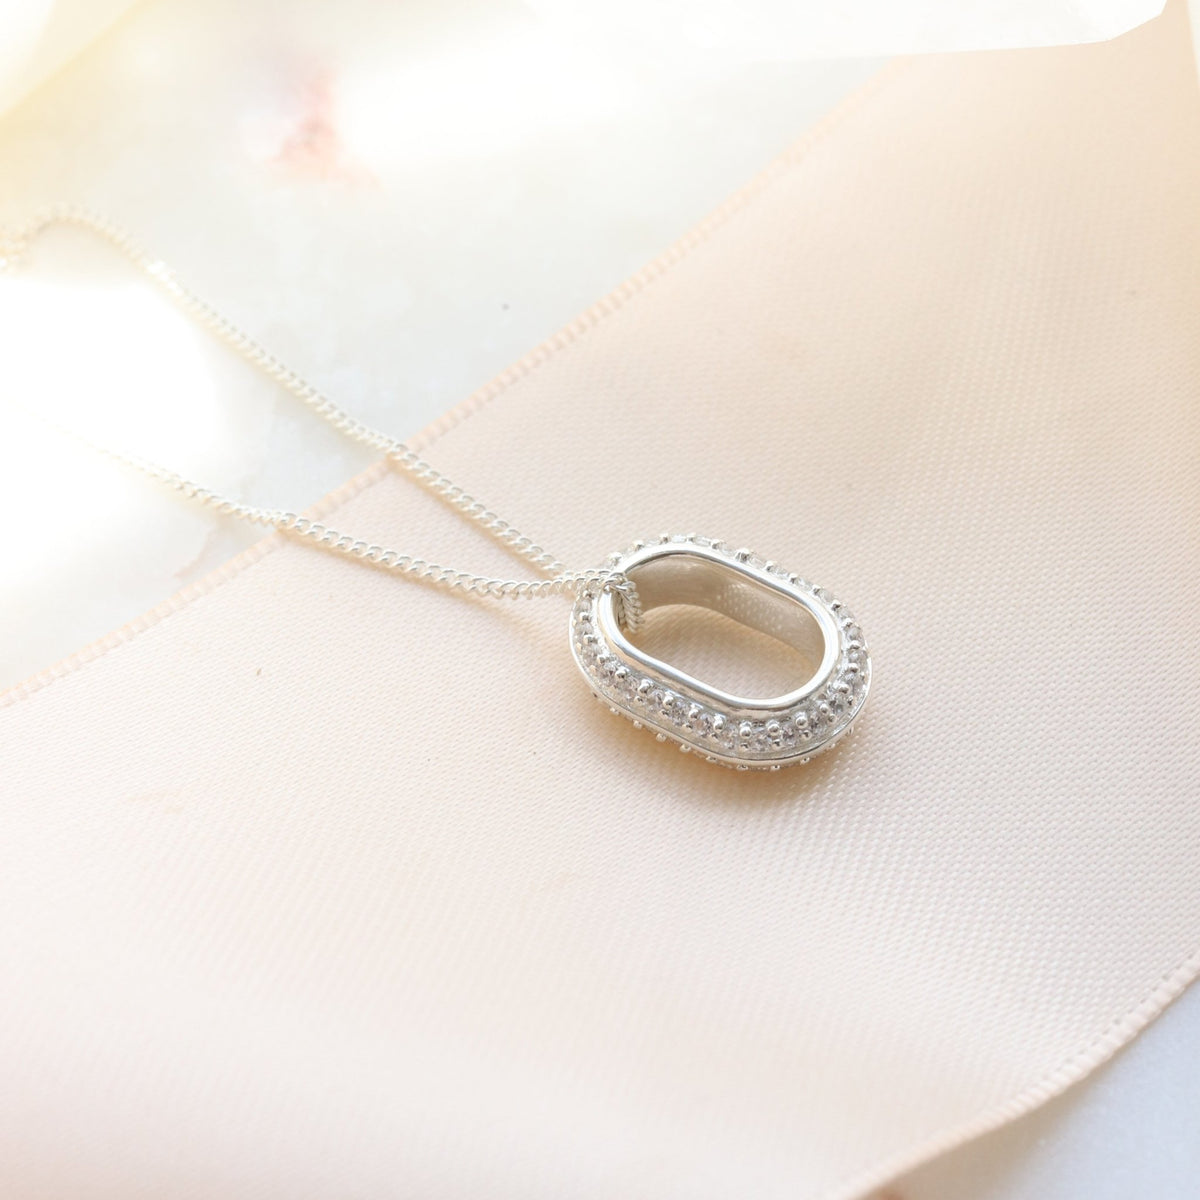 LOVE ETERNITY OVAL PENDANT NECKLACE - CUBIC ZIRCONIA &amp; SILVER - SO PRETTY CARA COTTER